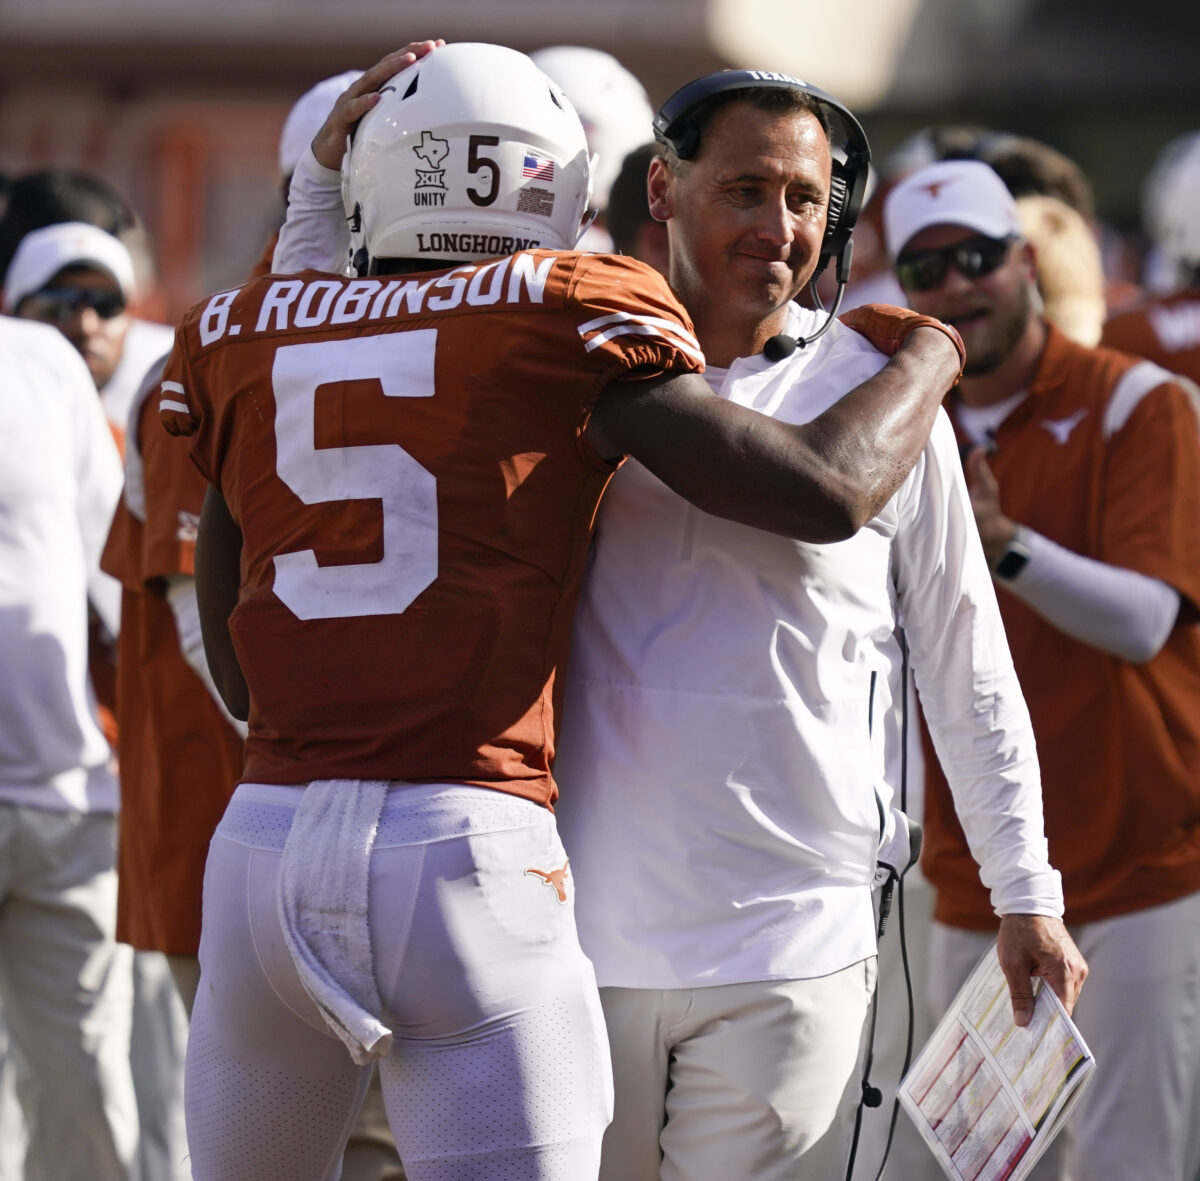 What Texas needs to improve upon ahead of the 2022 season